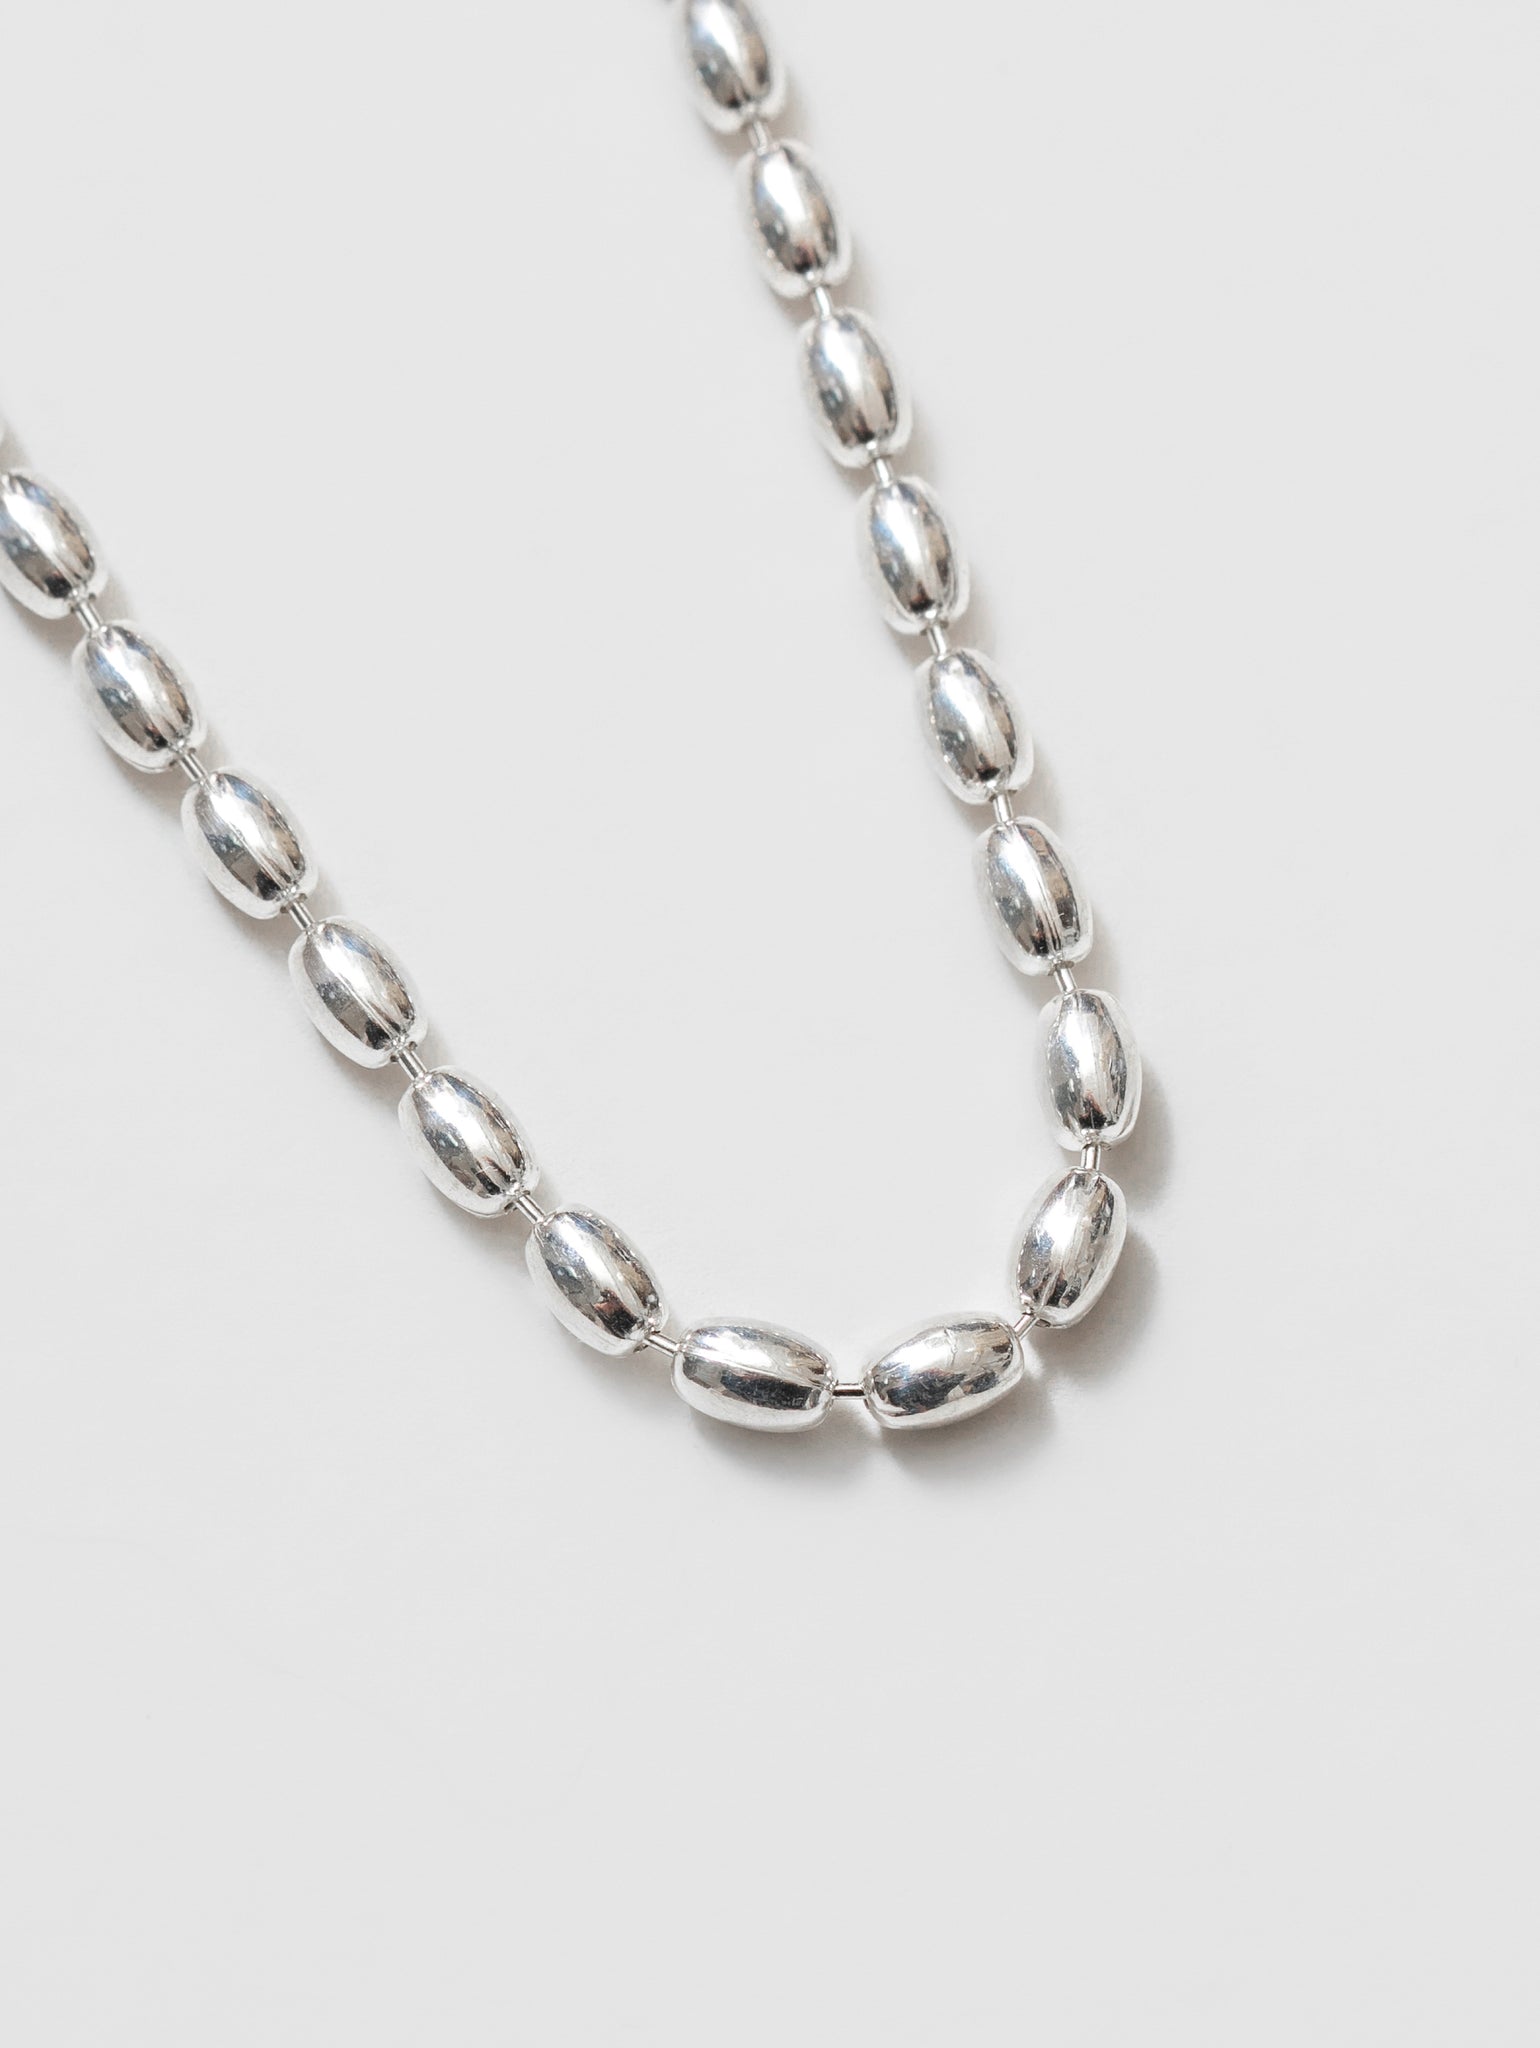 Wolf Circus Oval Bead Chain Necklace in Sterling Silver | Kai Necklace in Sterling Silver-Necklaces-wolfcircus.com